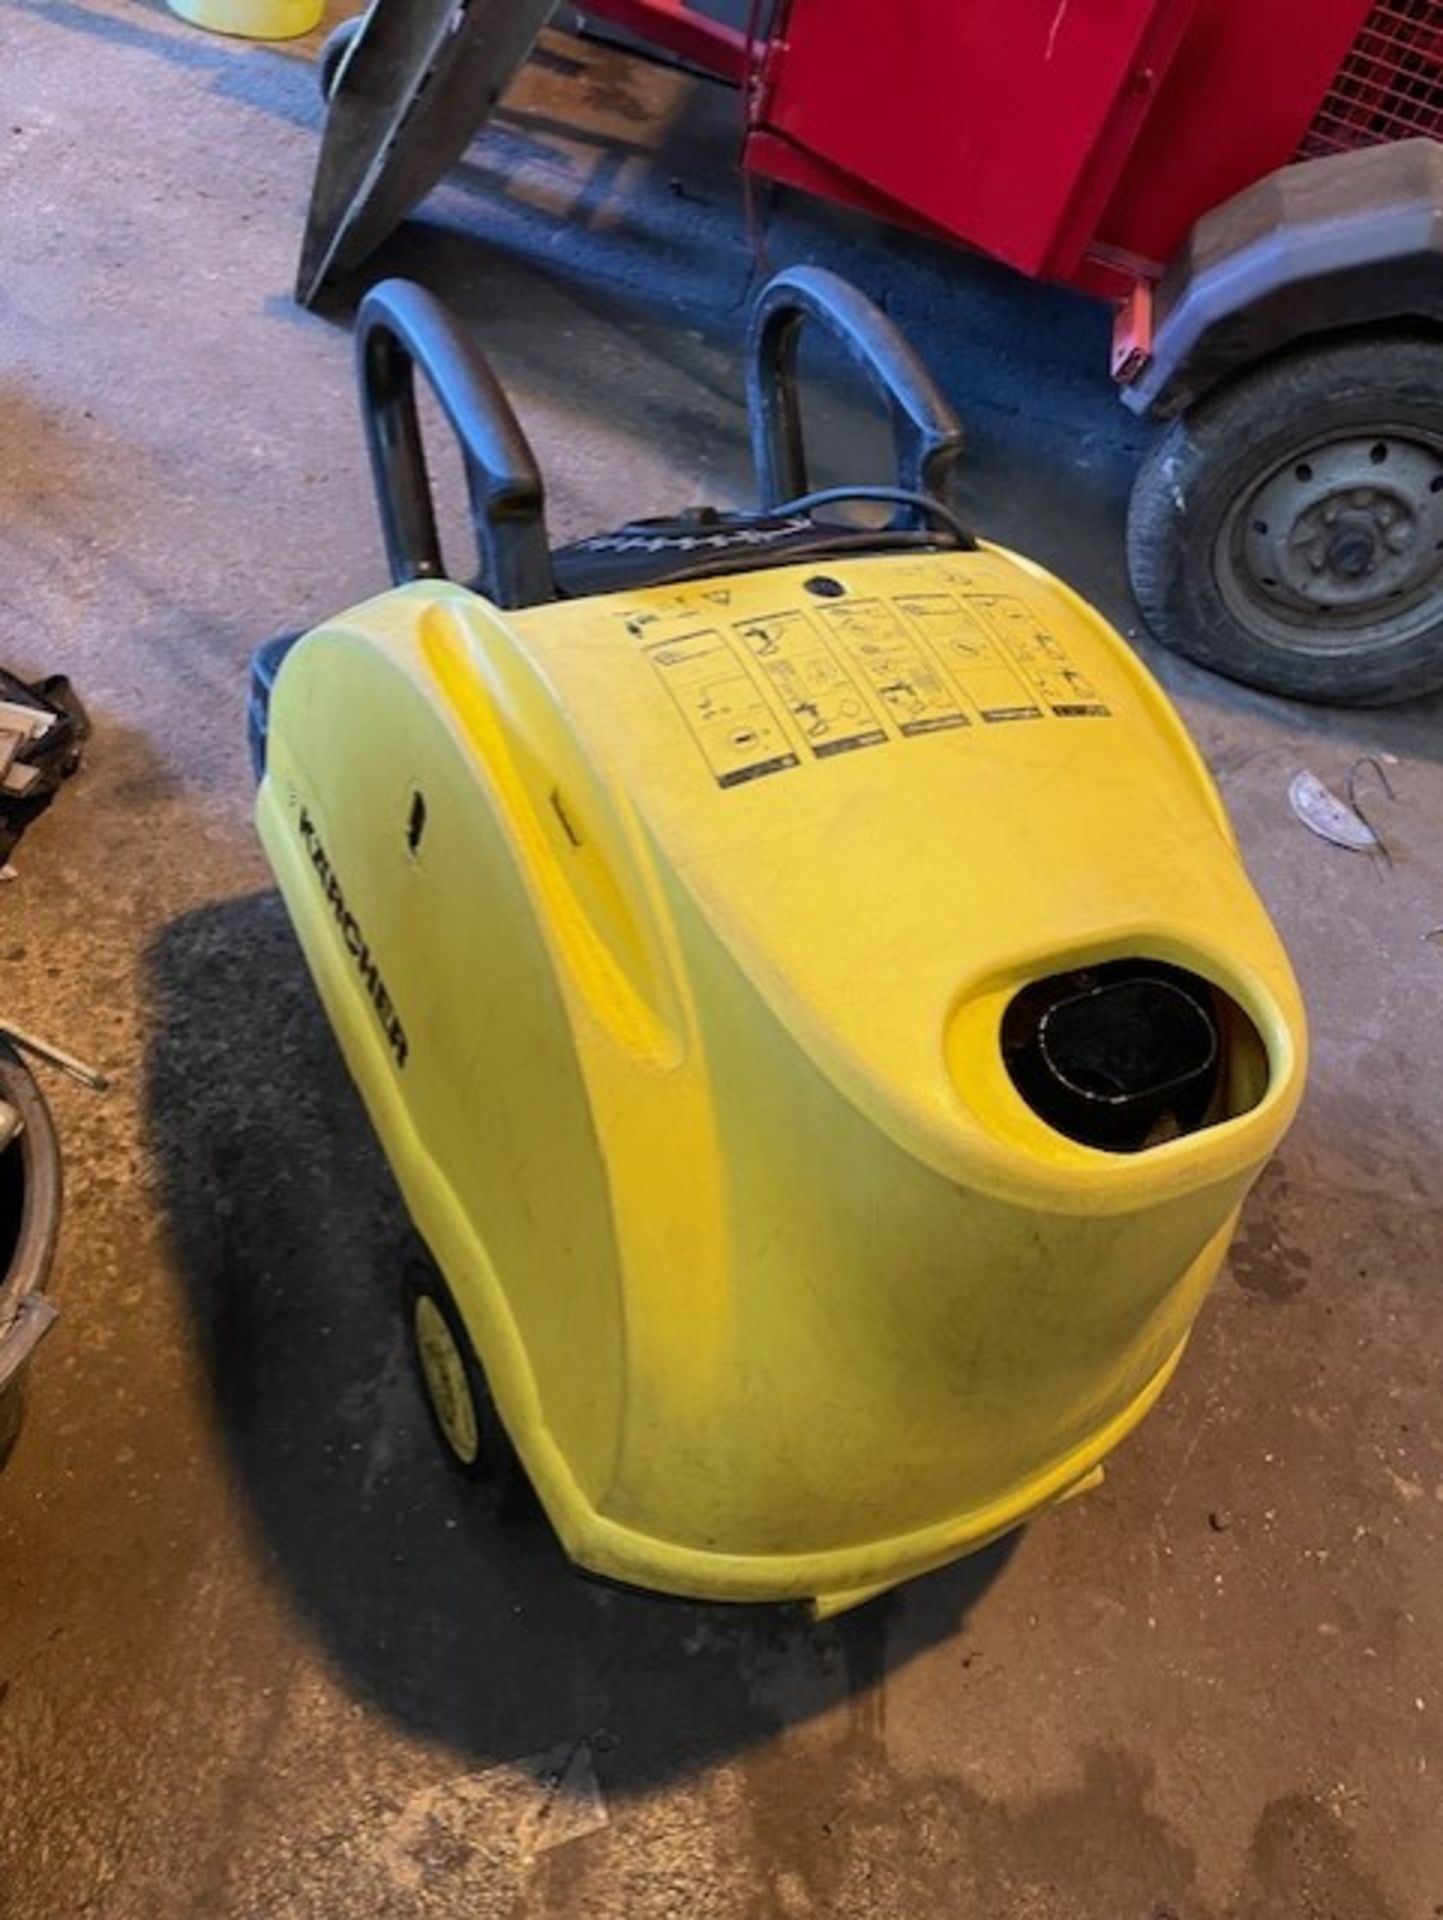 Karcher hot and cold pressure washer hds551 c model it’s in good condition still comes with hose and - Bild 6 aus 10